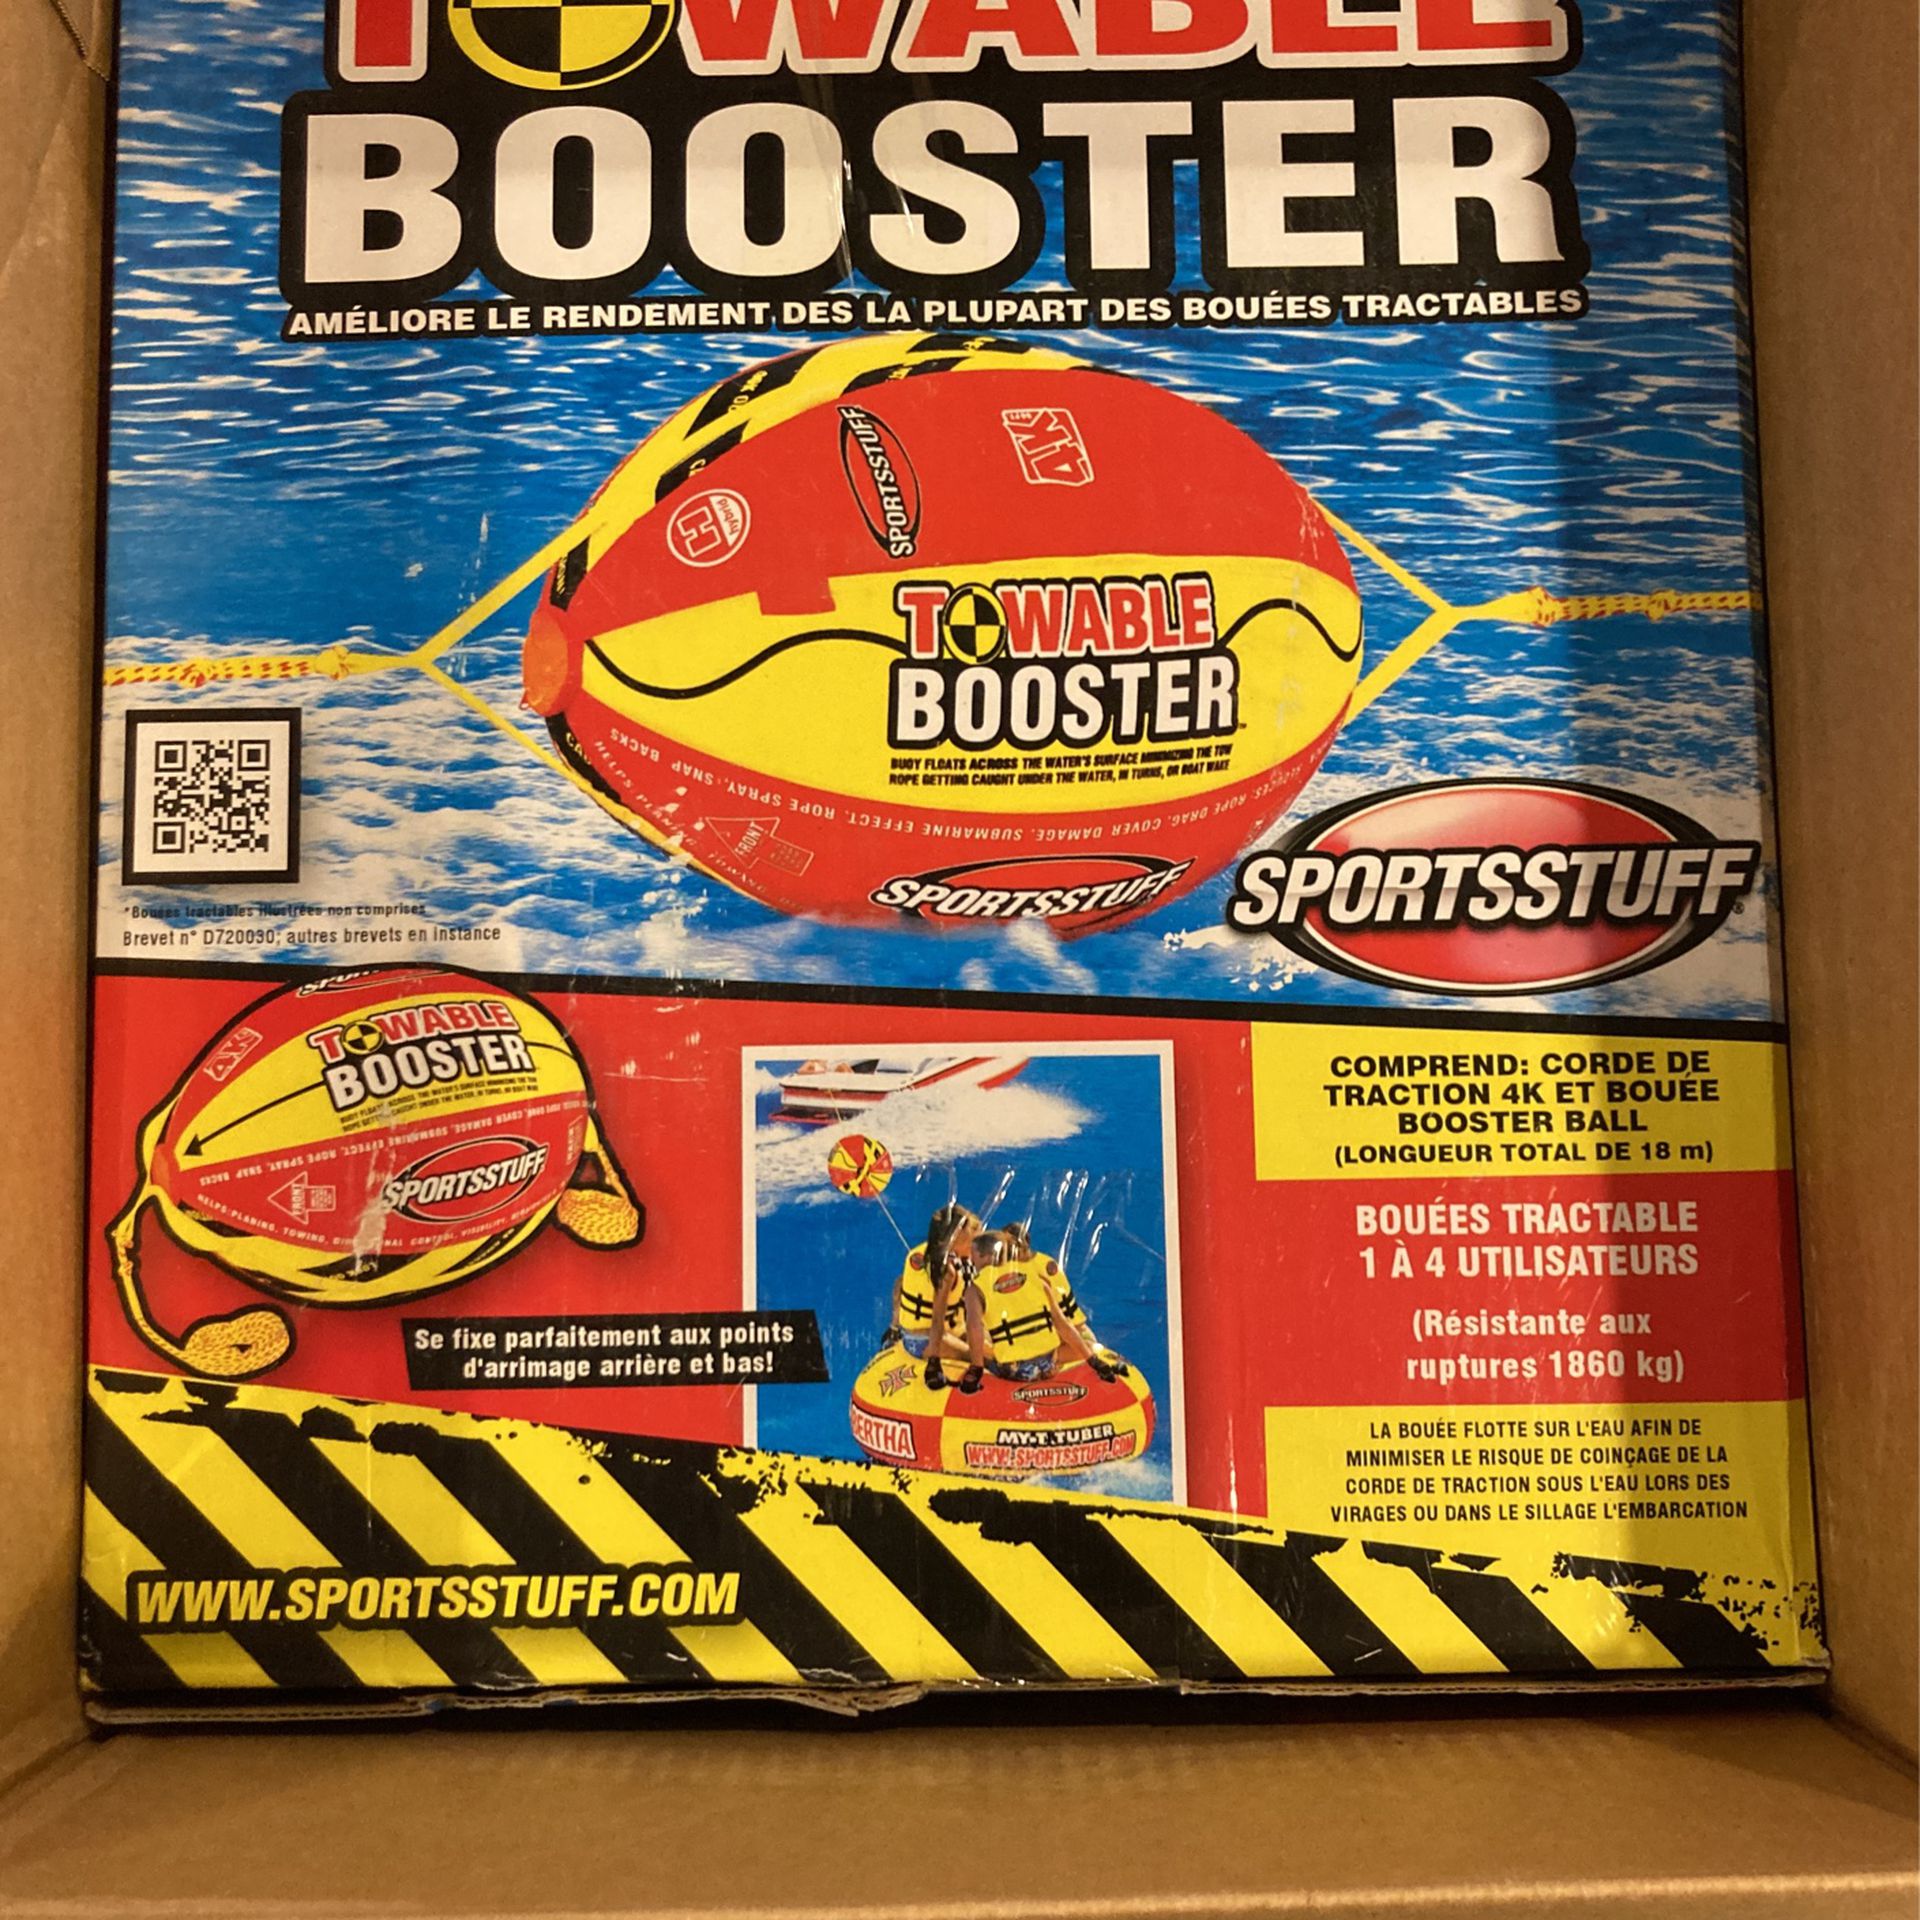 Towable Booster